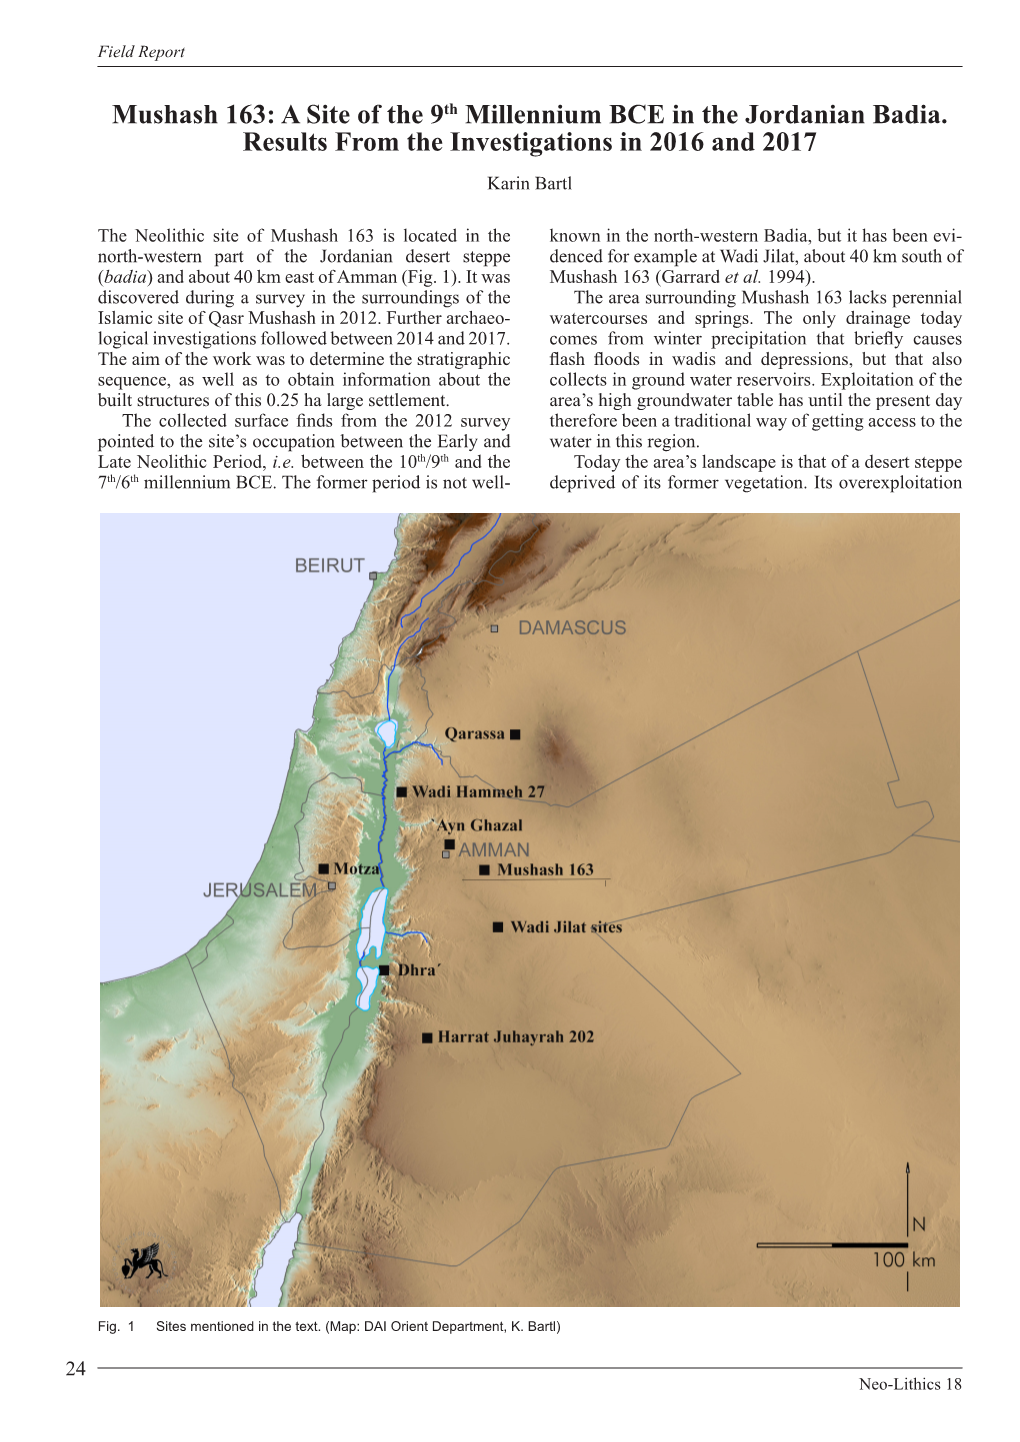 Mushash 163: a Site of the 9Th Millennium BCE in the Jordanian Badia